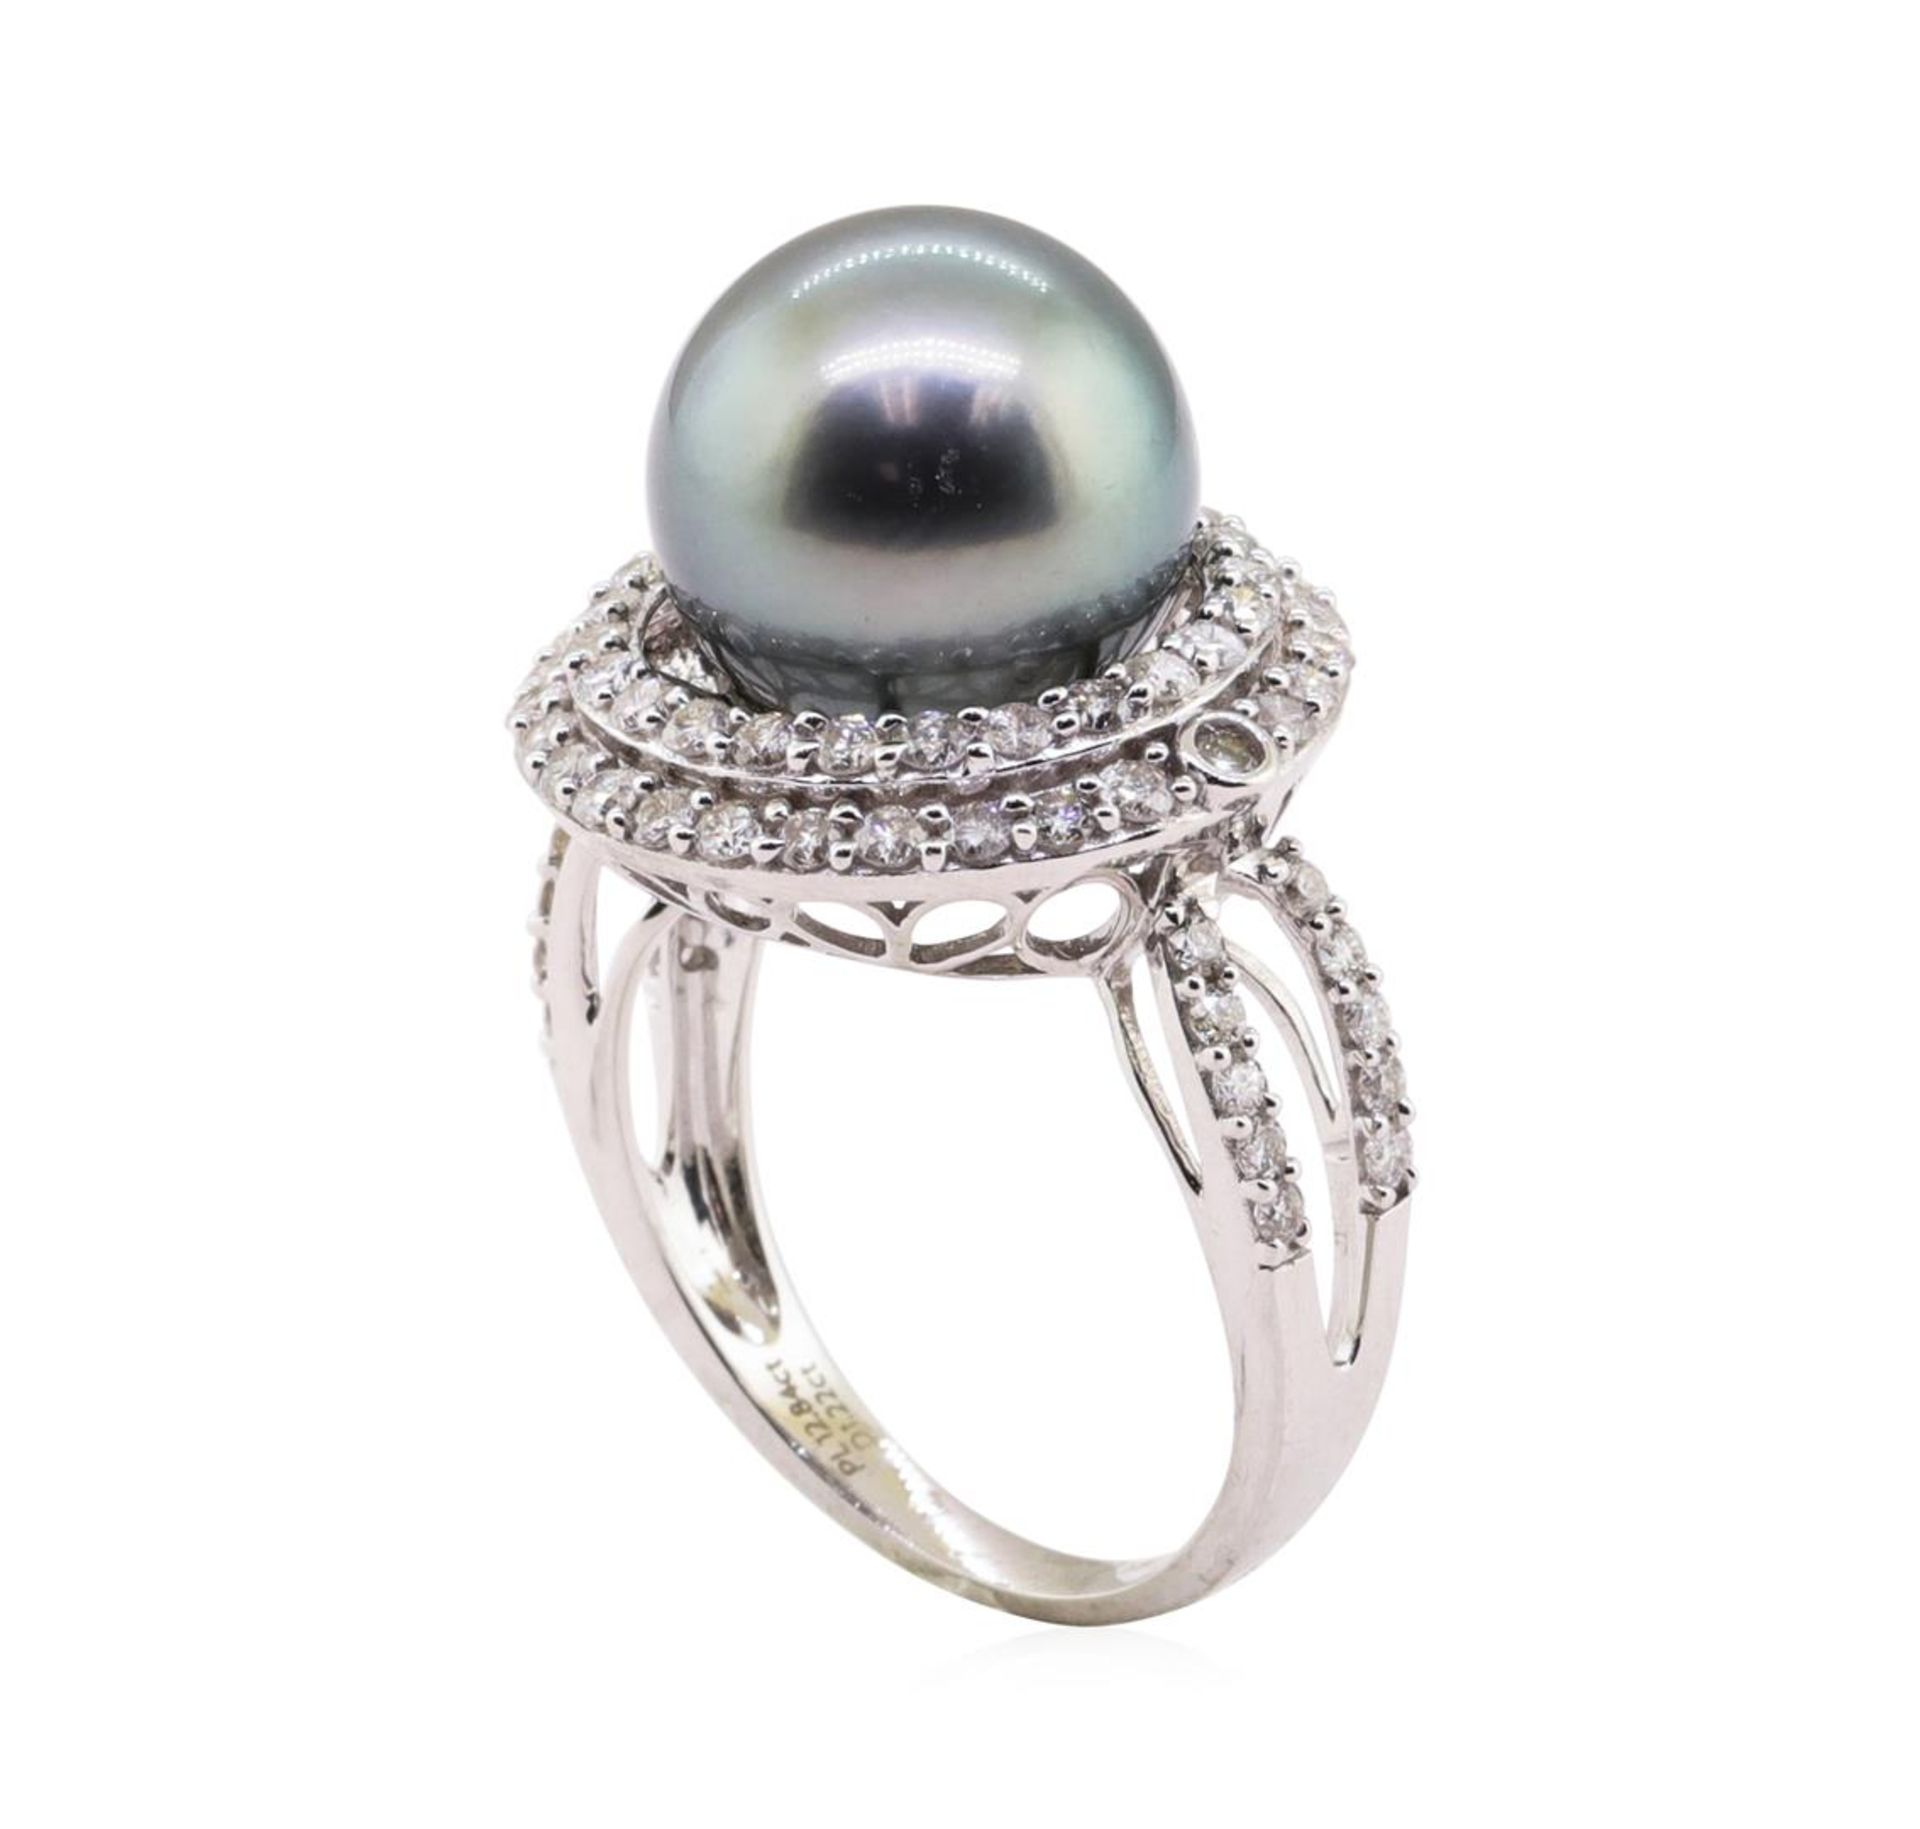 Tahitian Pearl and Diamond Ring - 18KT White Gold - Image 4 of 5